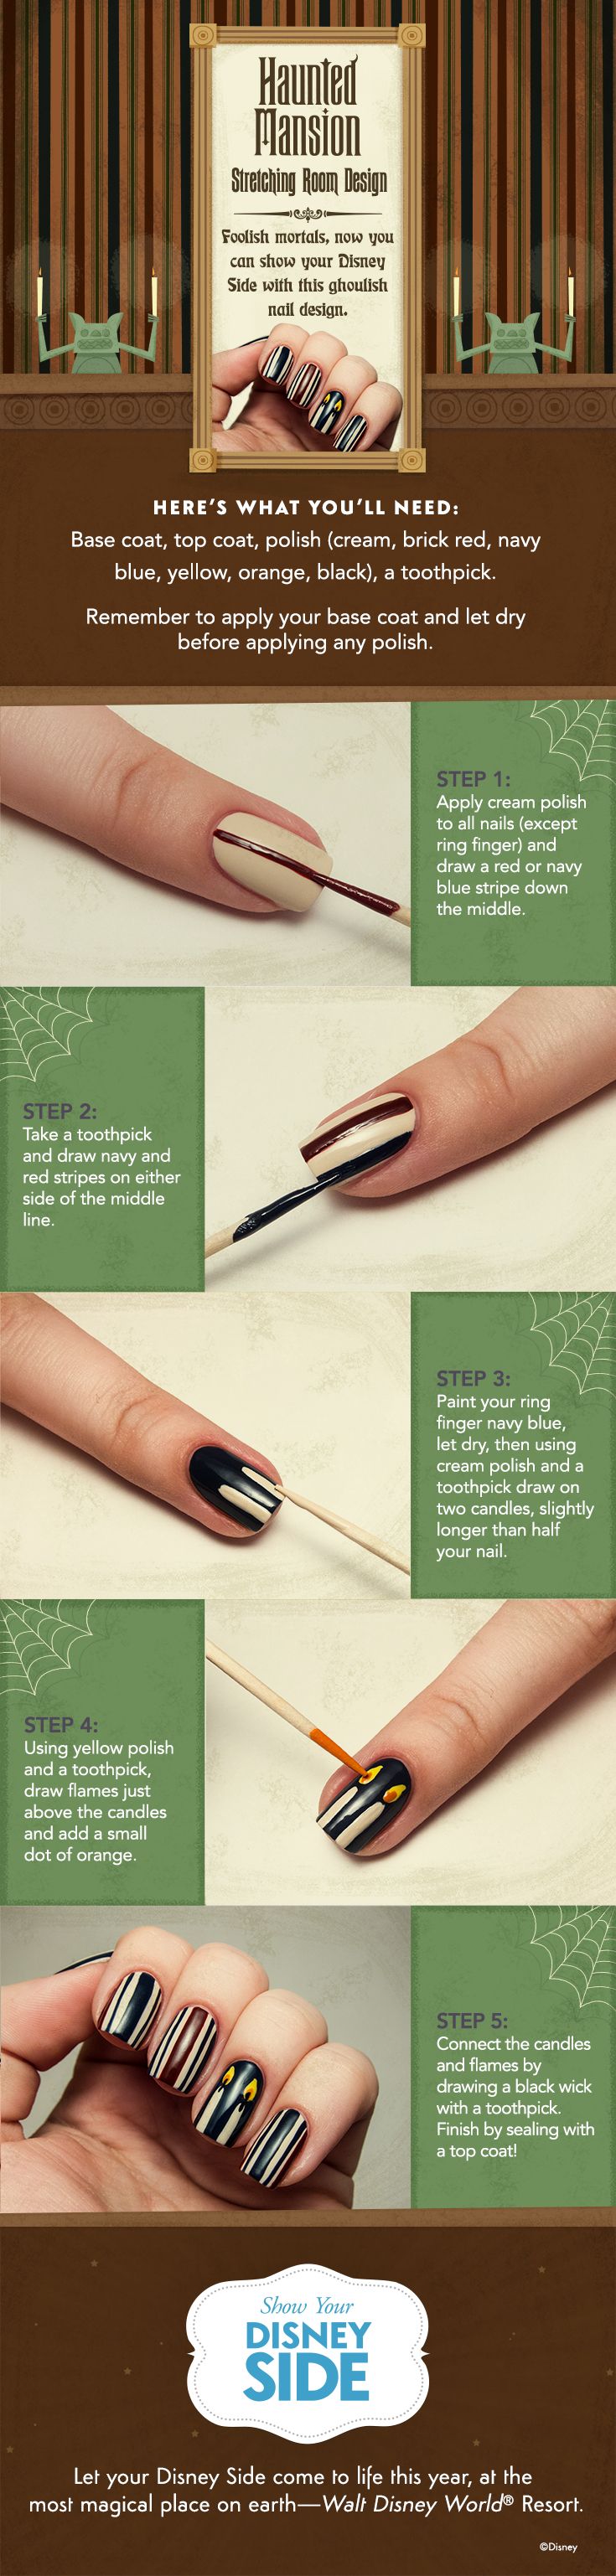 Show Your 'Disney Side': Haunted Mansion Nail Tutorial | Disney Parks Blog